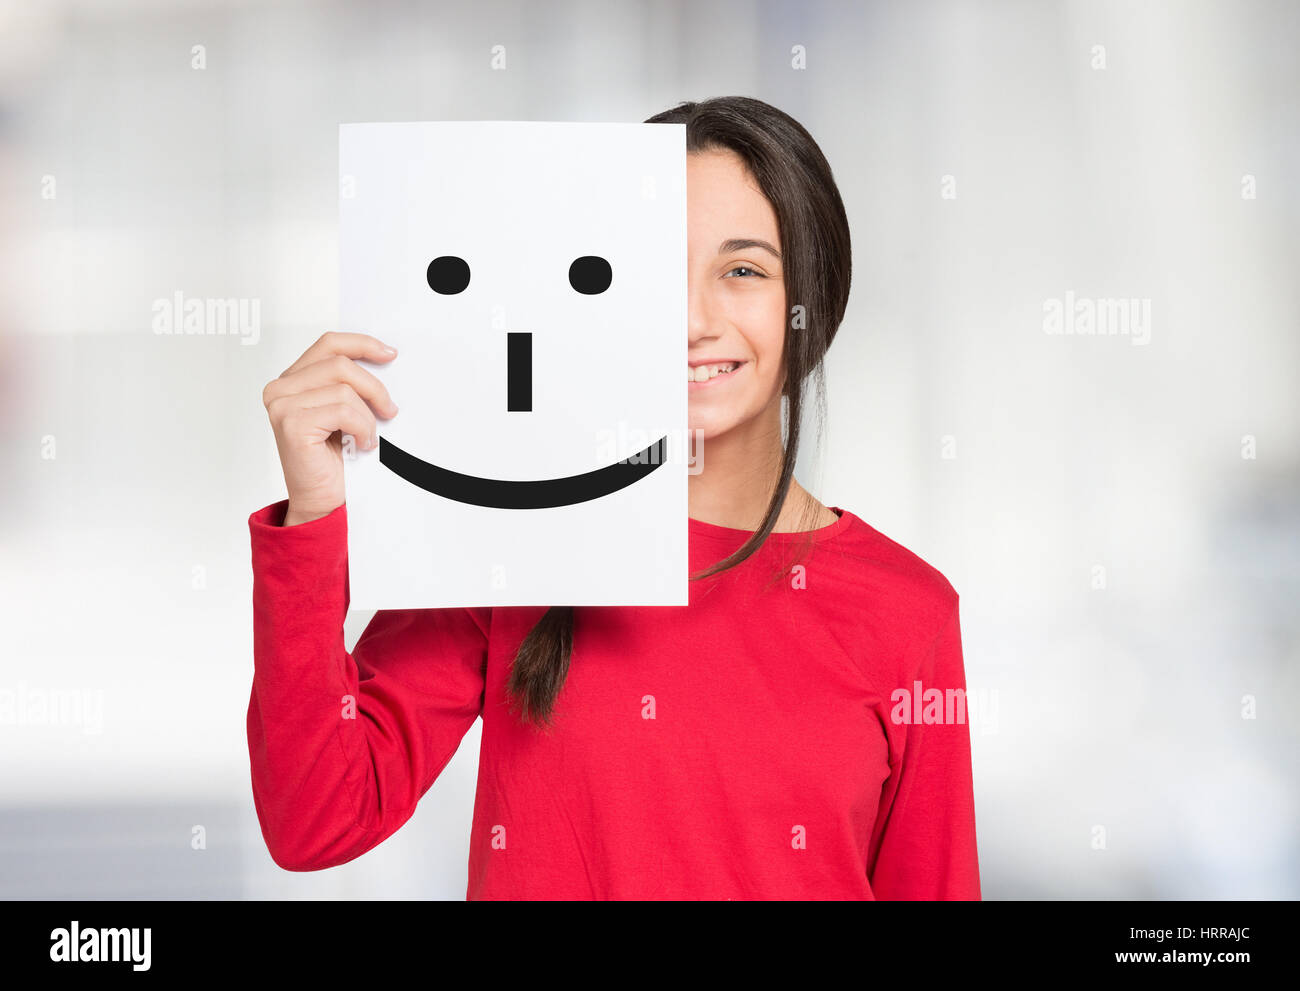 Happy girl covering her face with a smiley emoticon on a paper sheet Stock Photo